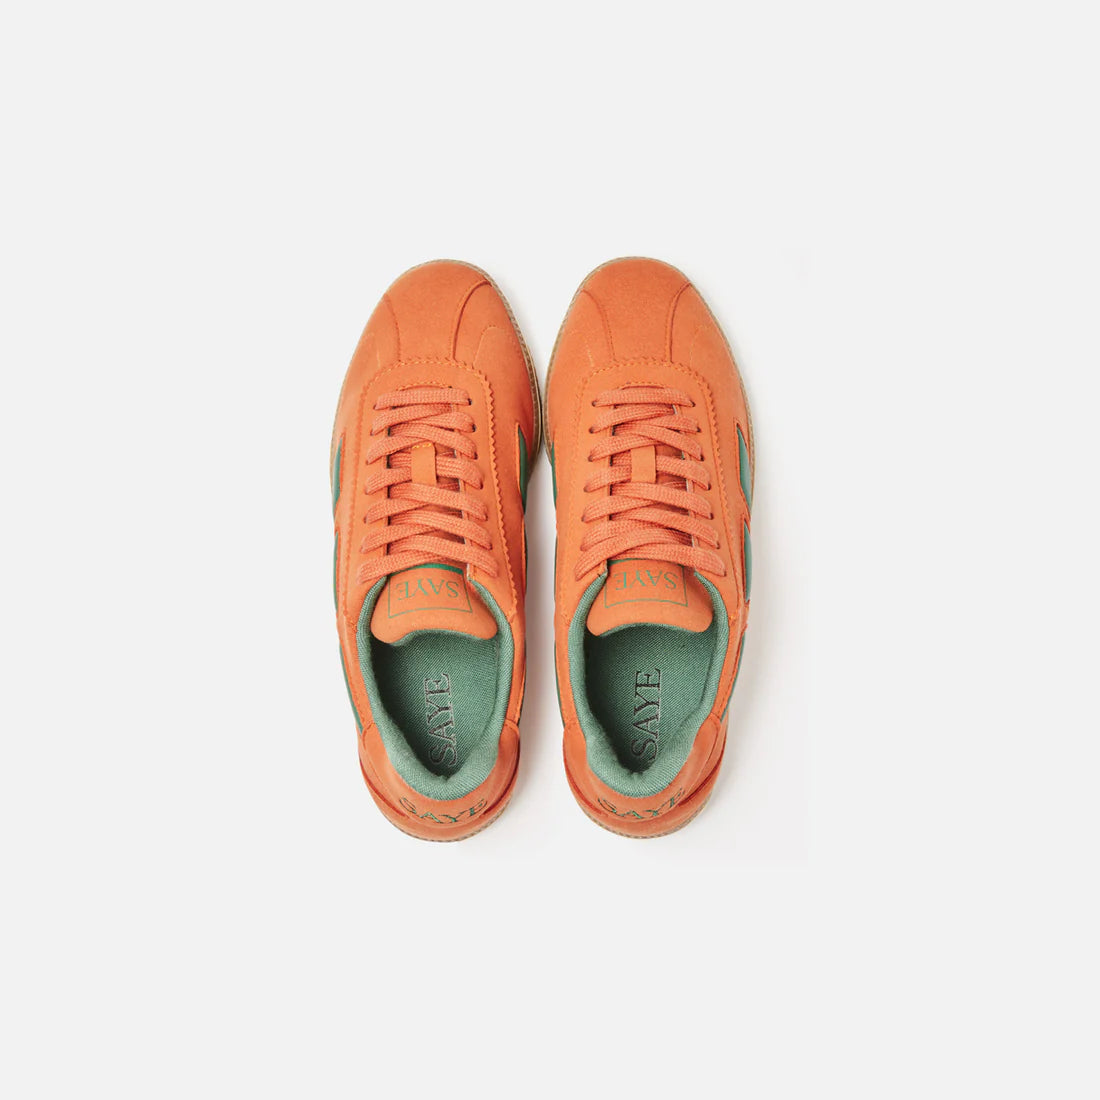 A pair of SAYE Modelo '70 Sneakers in orange vegan suede on a white surface.